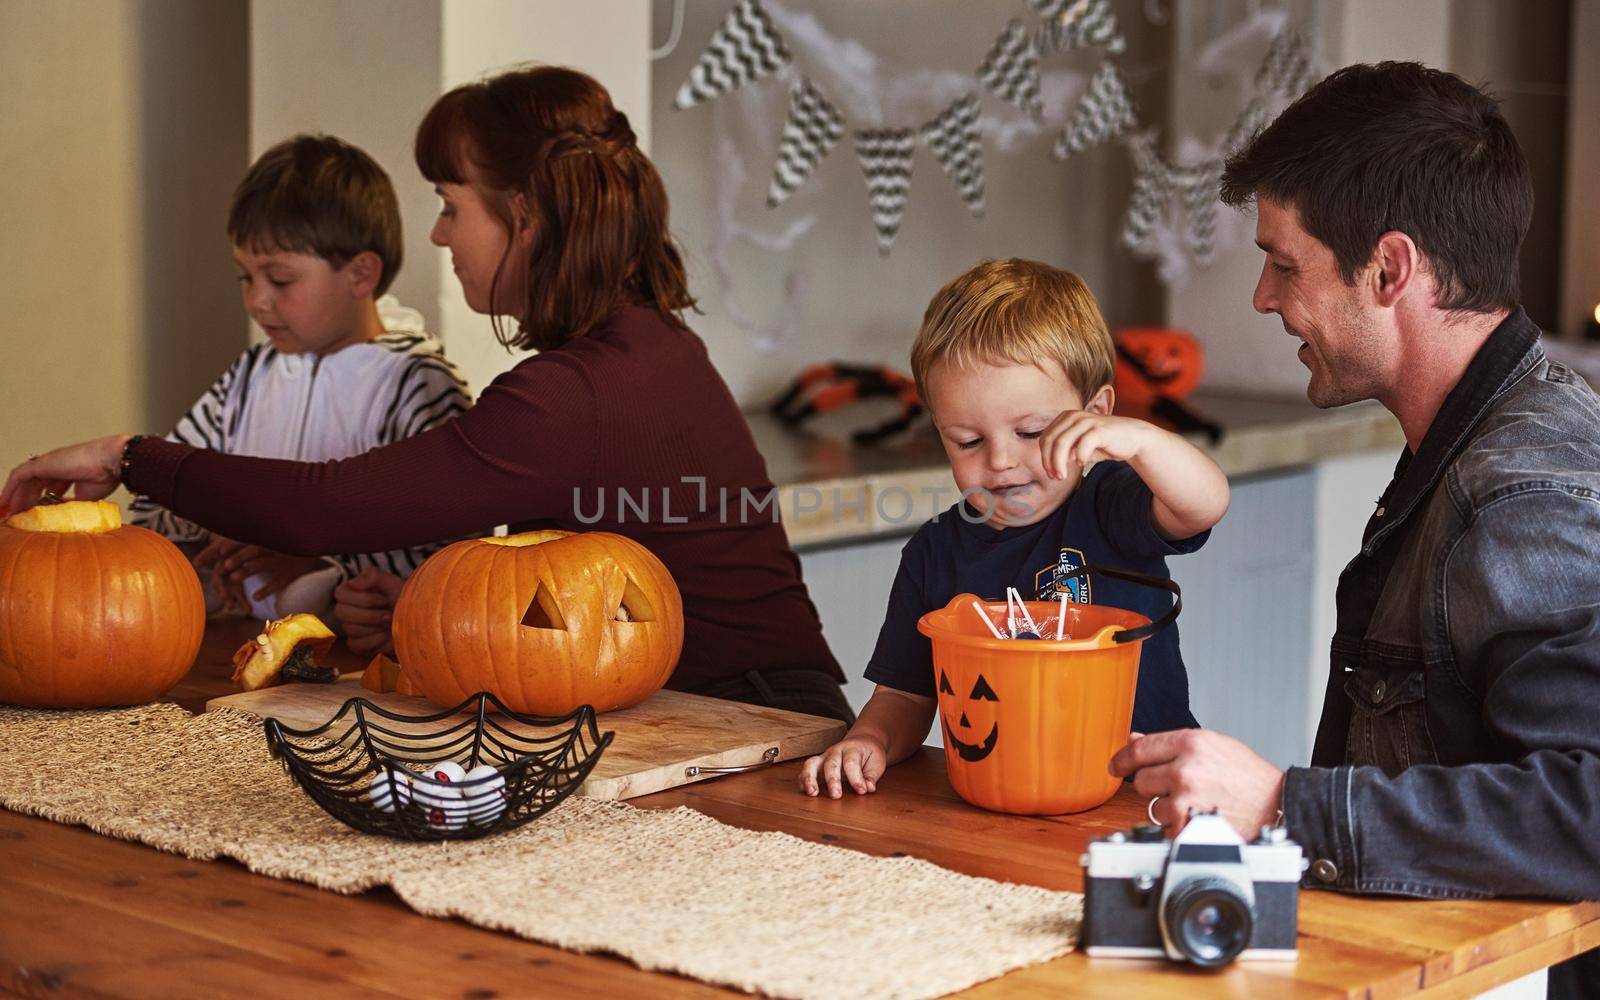 Candy keeps the monsters away on Halloween. an adorable young family carving out pumpkins and celebrating halloween together at home